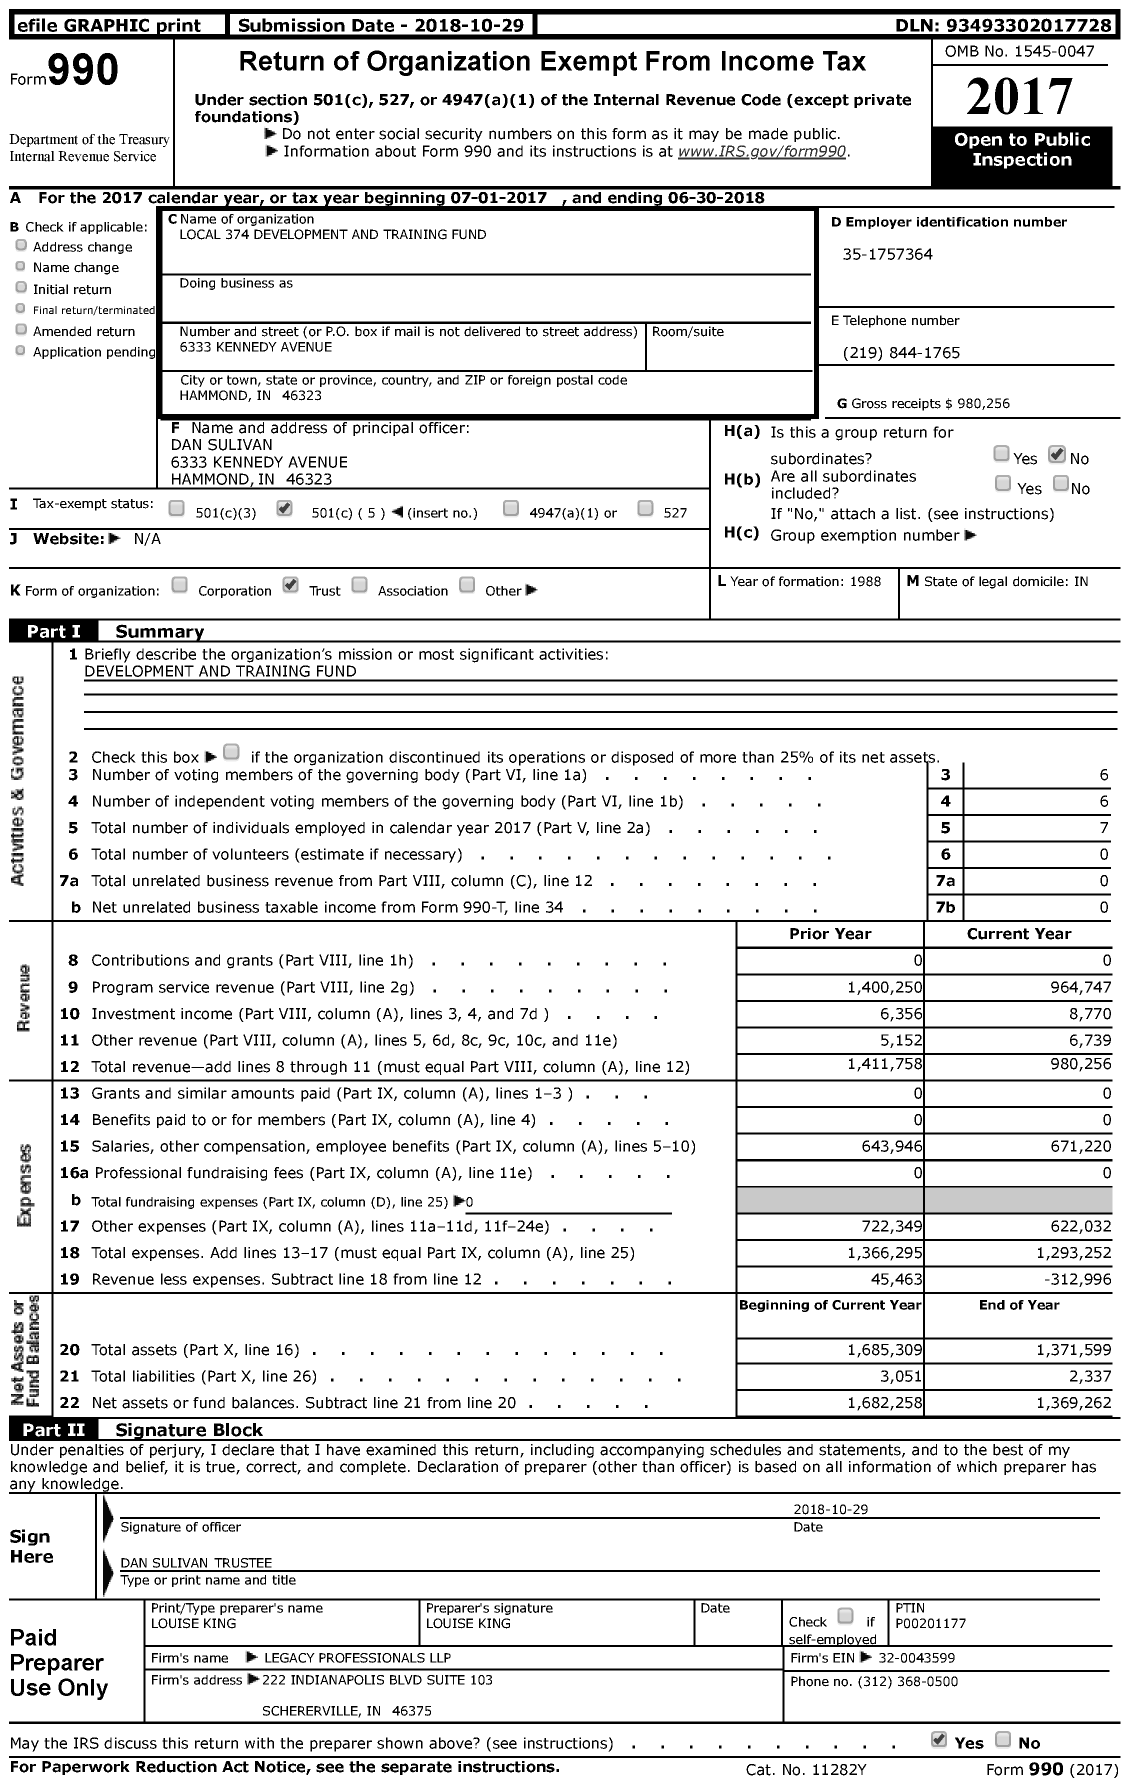 Image of first page of 2017 Form 990 for Local 374 Development and Training Fund